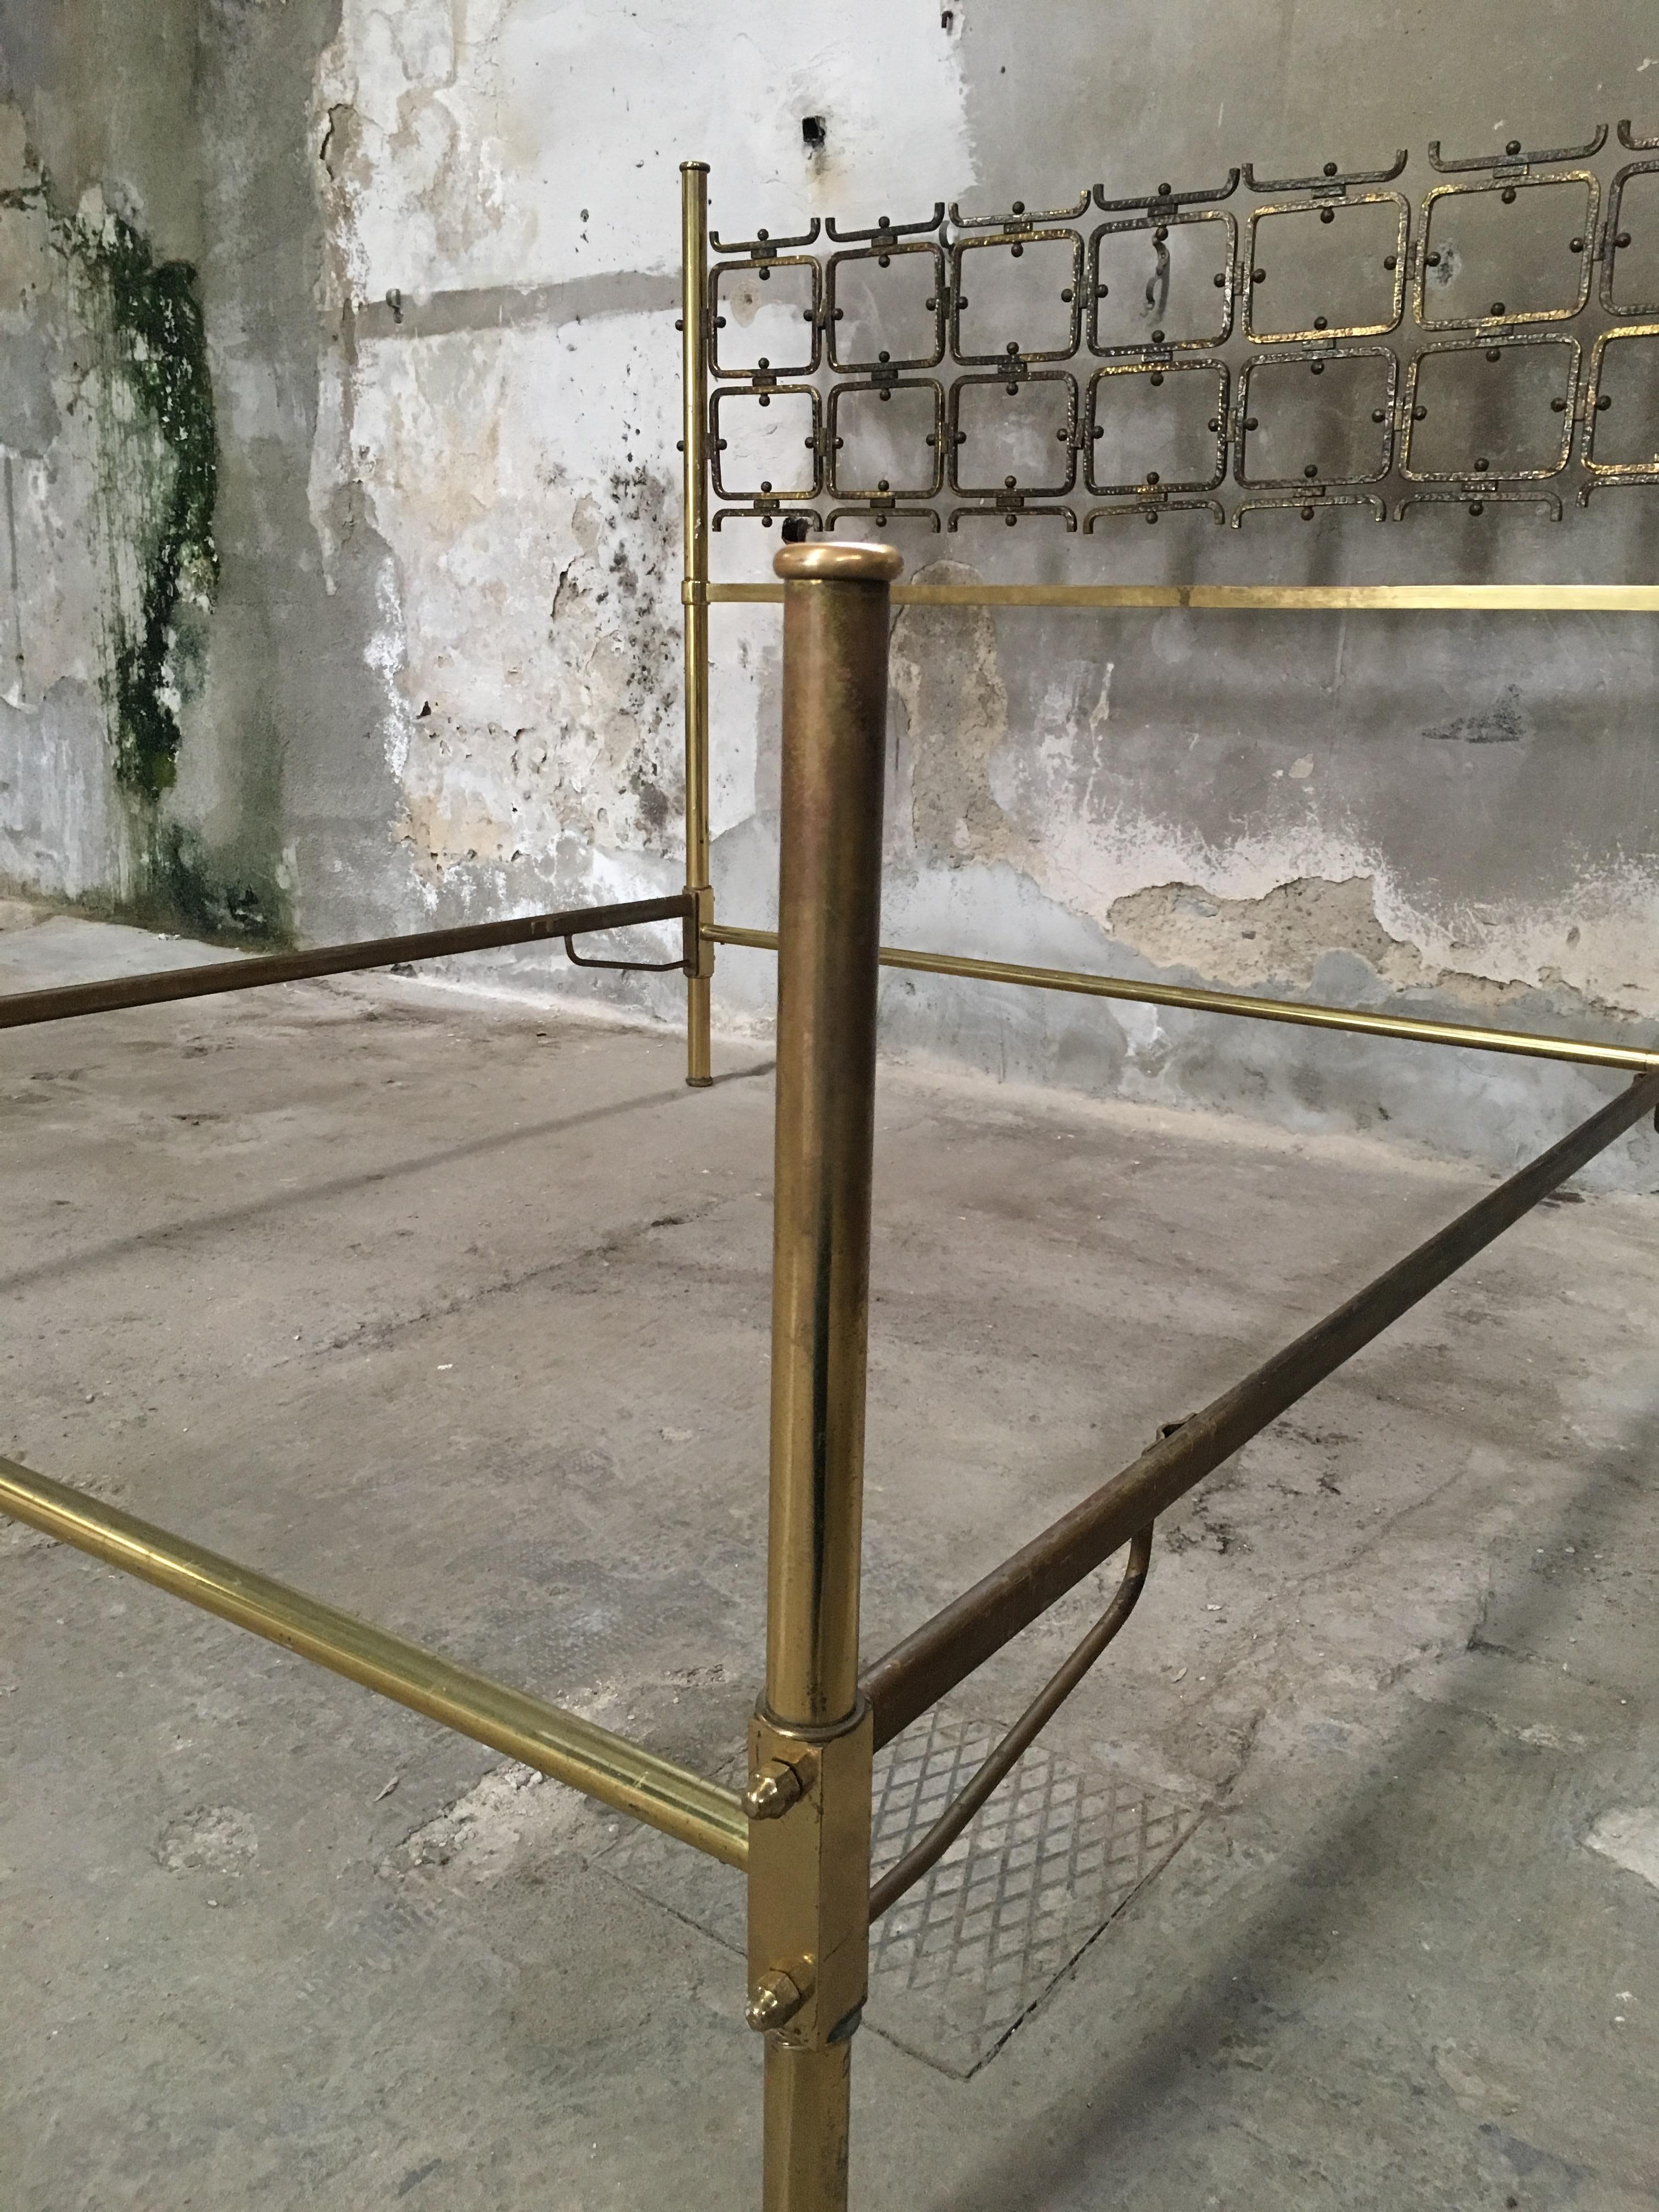 Mid-Century Modern Italian Burnished Brass Double Bed by Pomodoro and Borsani For Sale 1